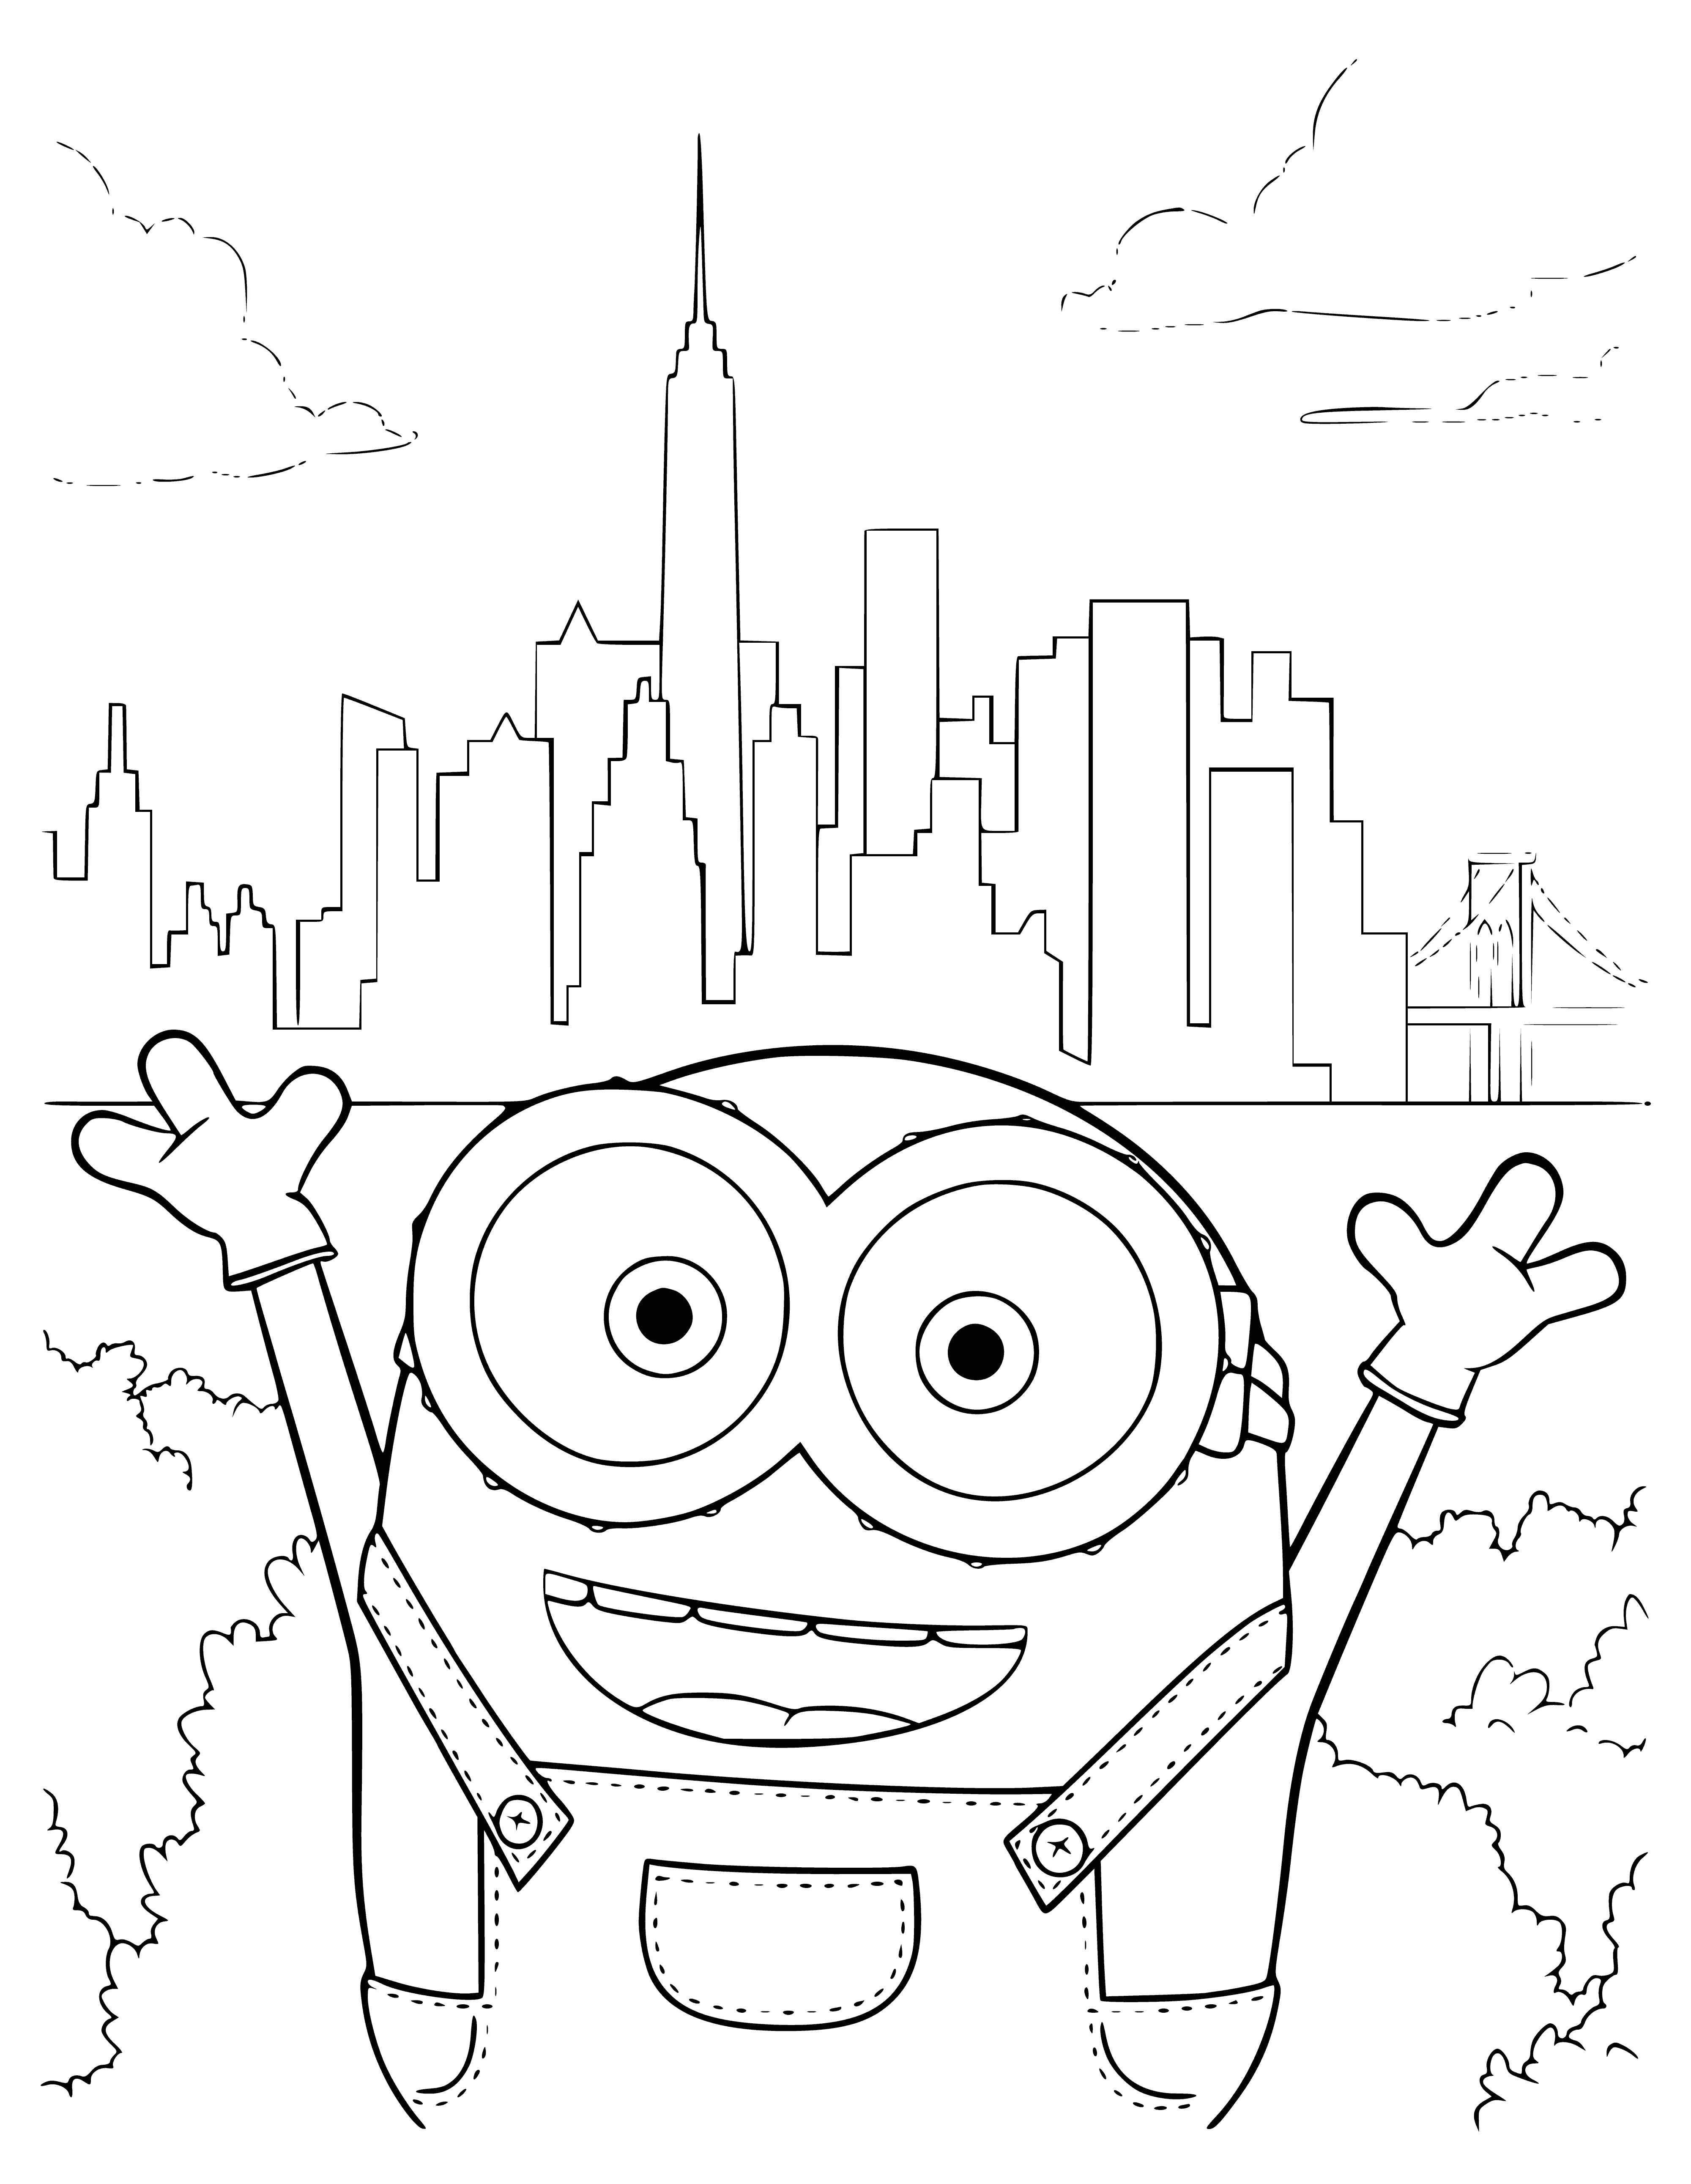 coloring page: Minions are small, round, yellow creatures with big eyes, small mouth &overalls, holding a hammer in their right hand.